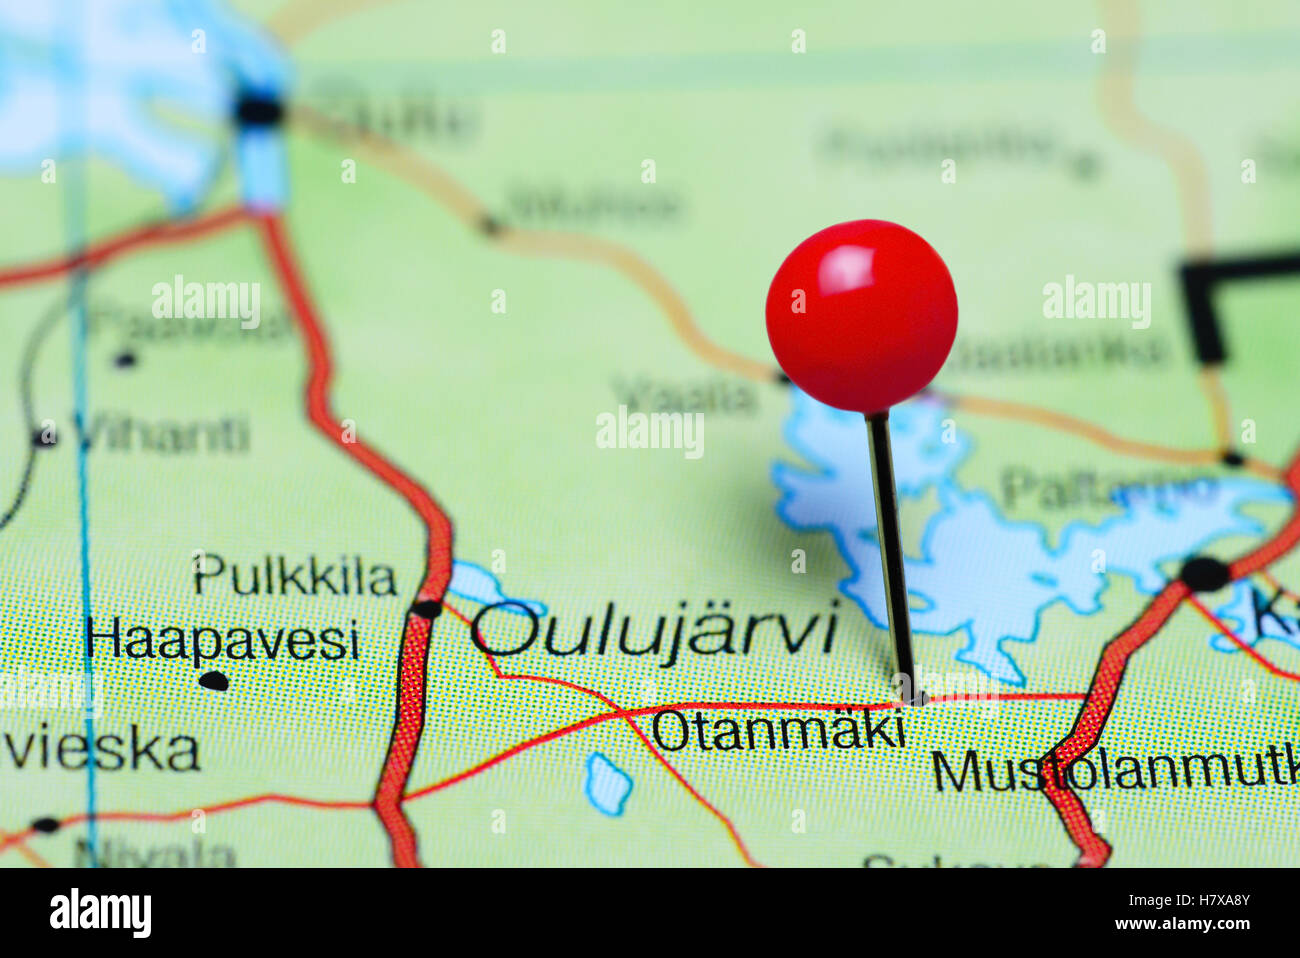 Otanmaki pinned on a map of Finland Stock Photo